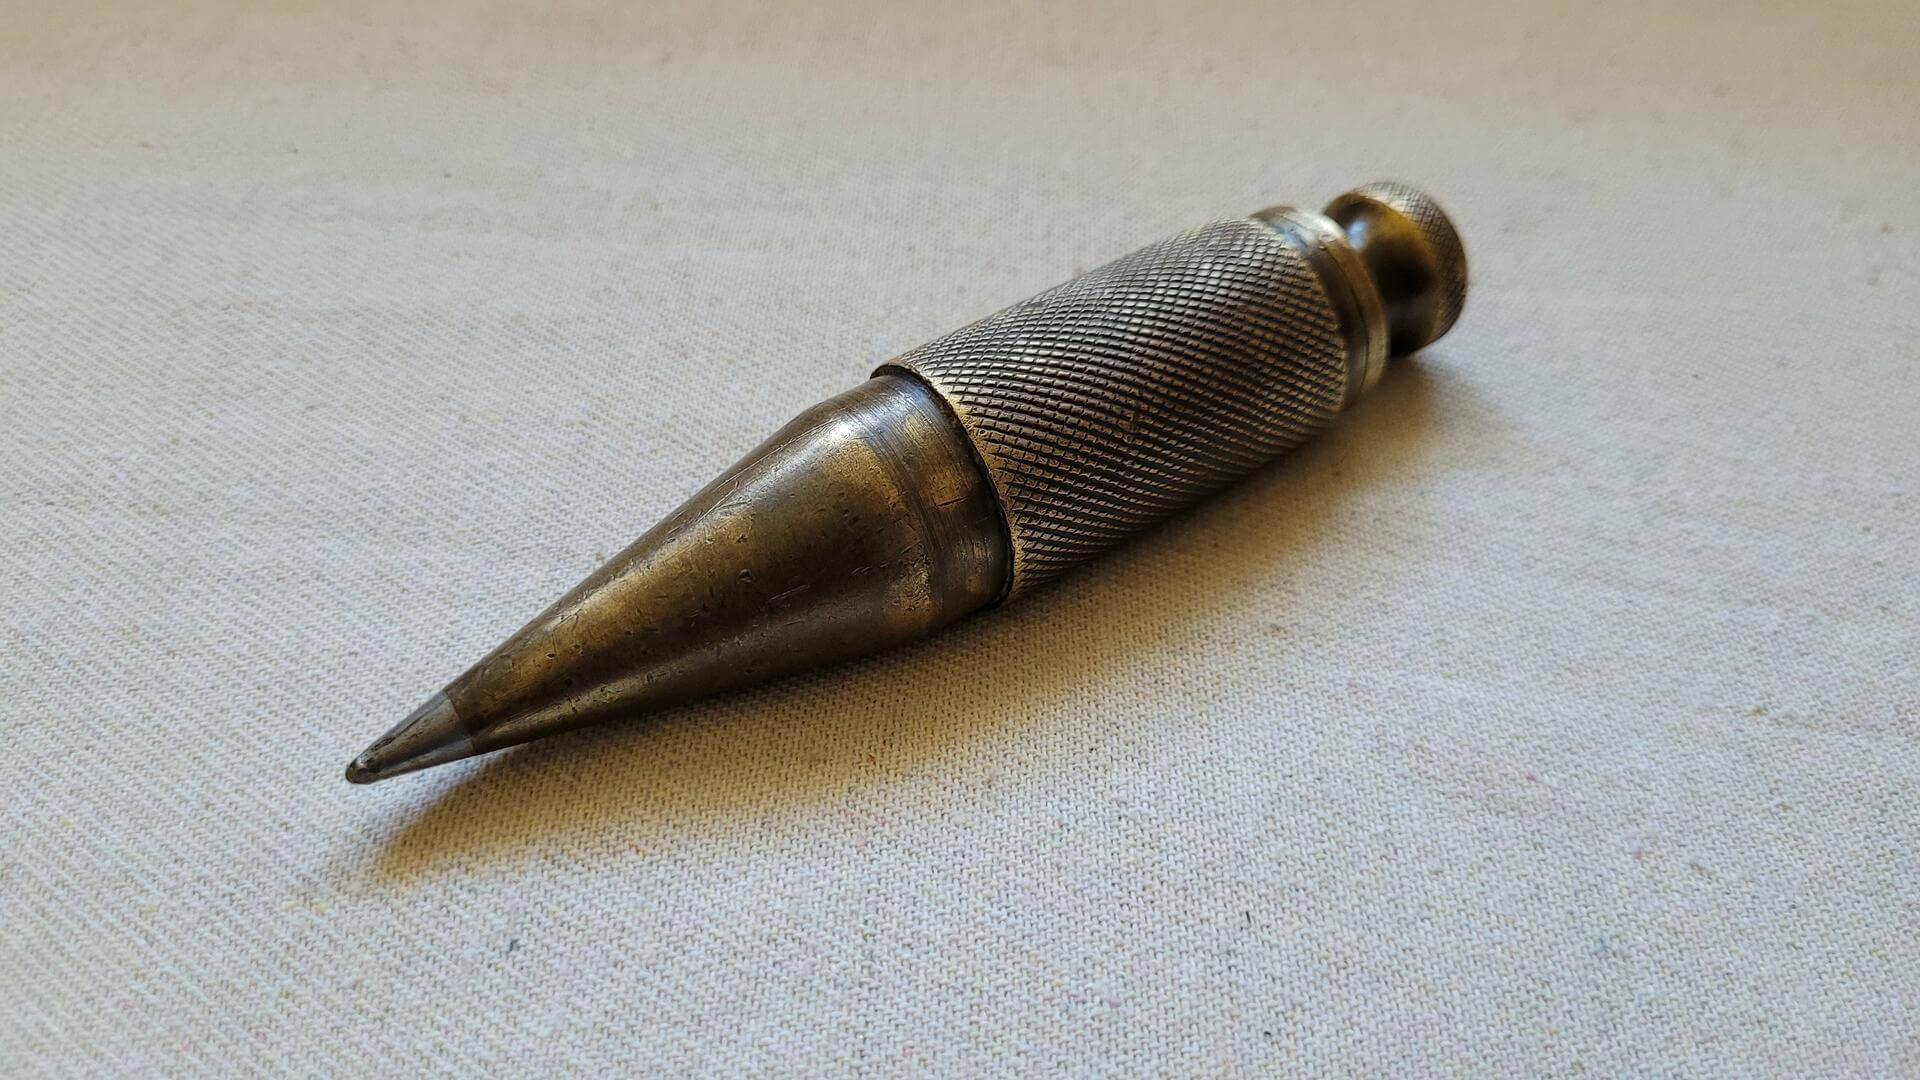 Vintage Solid Brass Knurled Plumb Bob w Steel Point Tip 5 Inches / 380 grams / 13.4 oz - Antique carpenter and stone mason marking and measuring tools